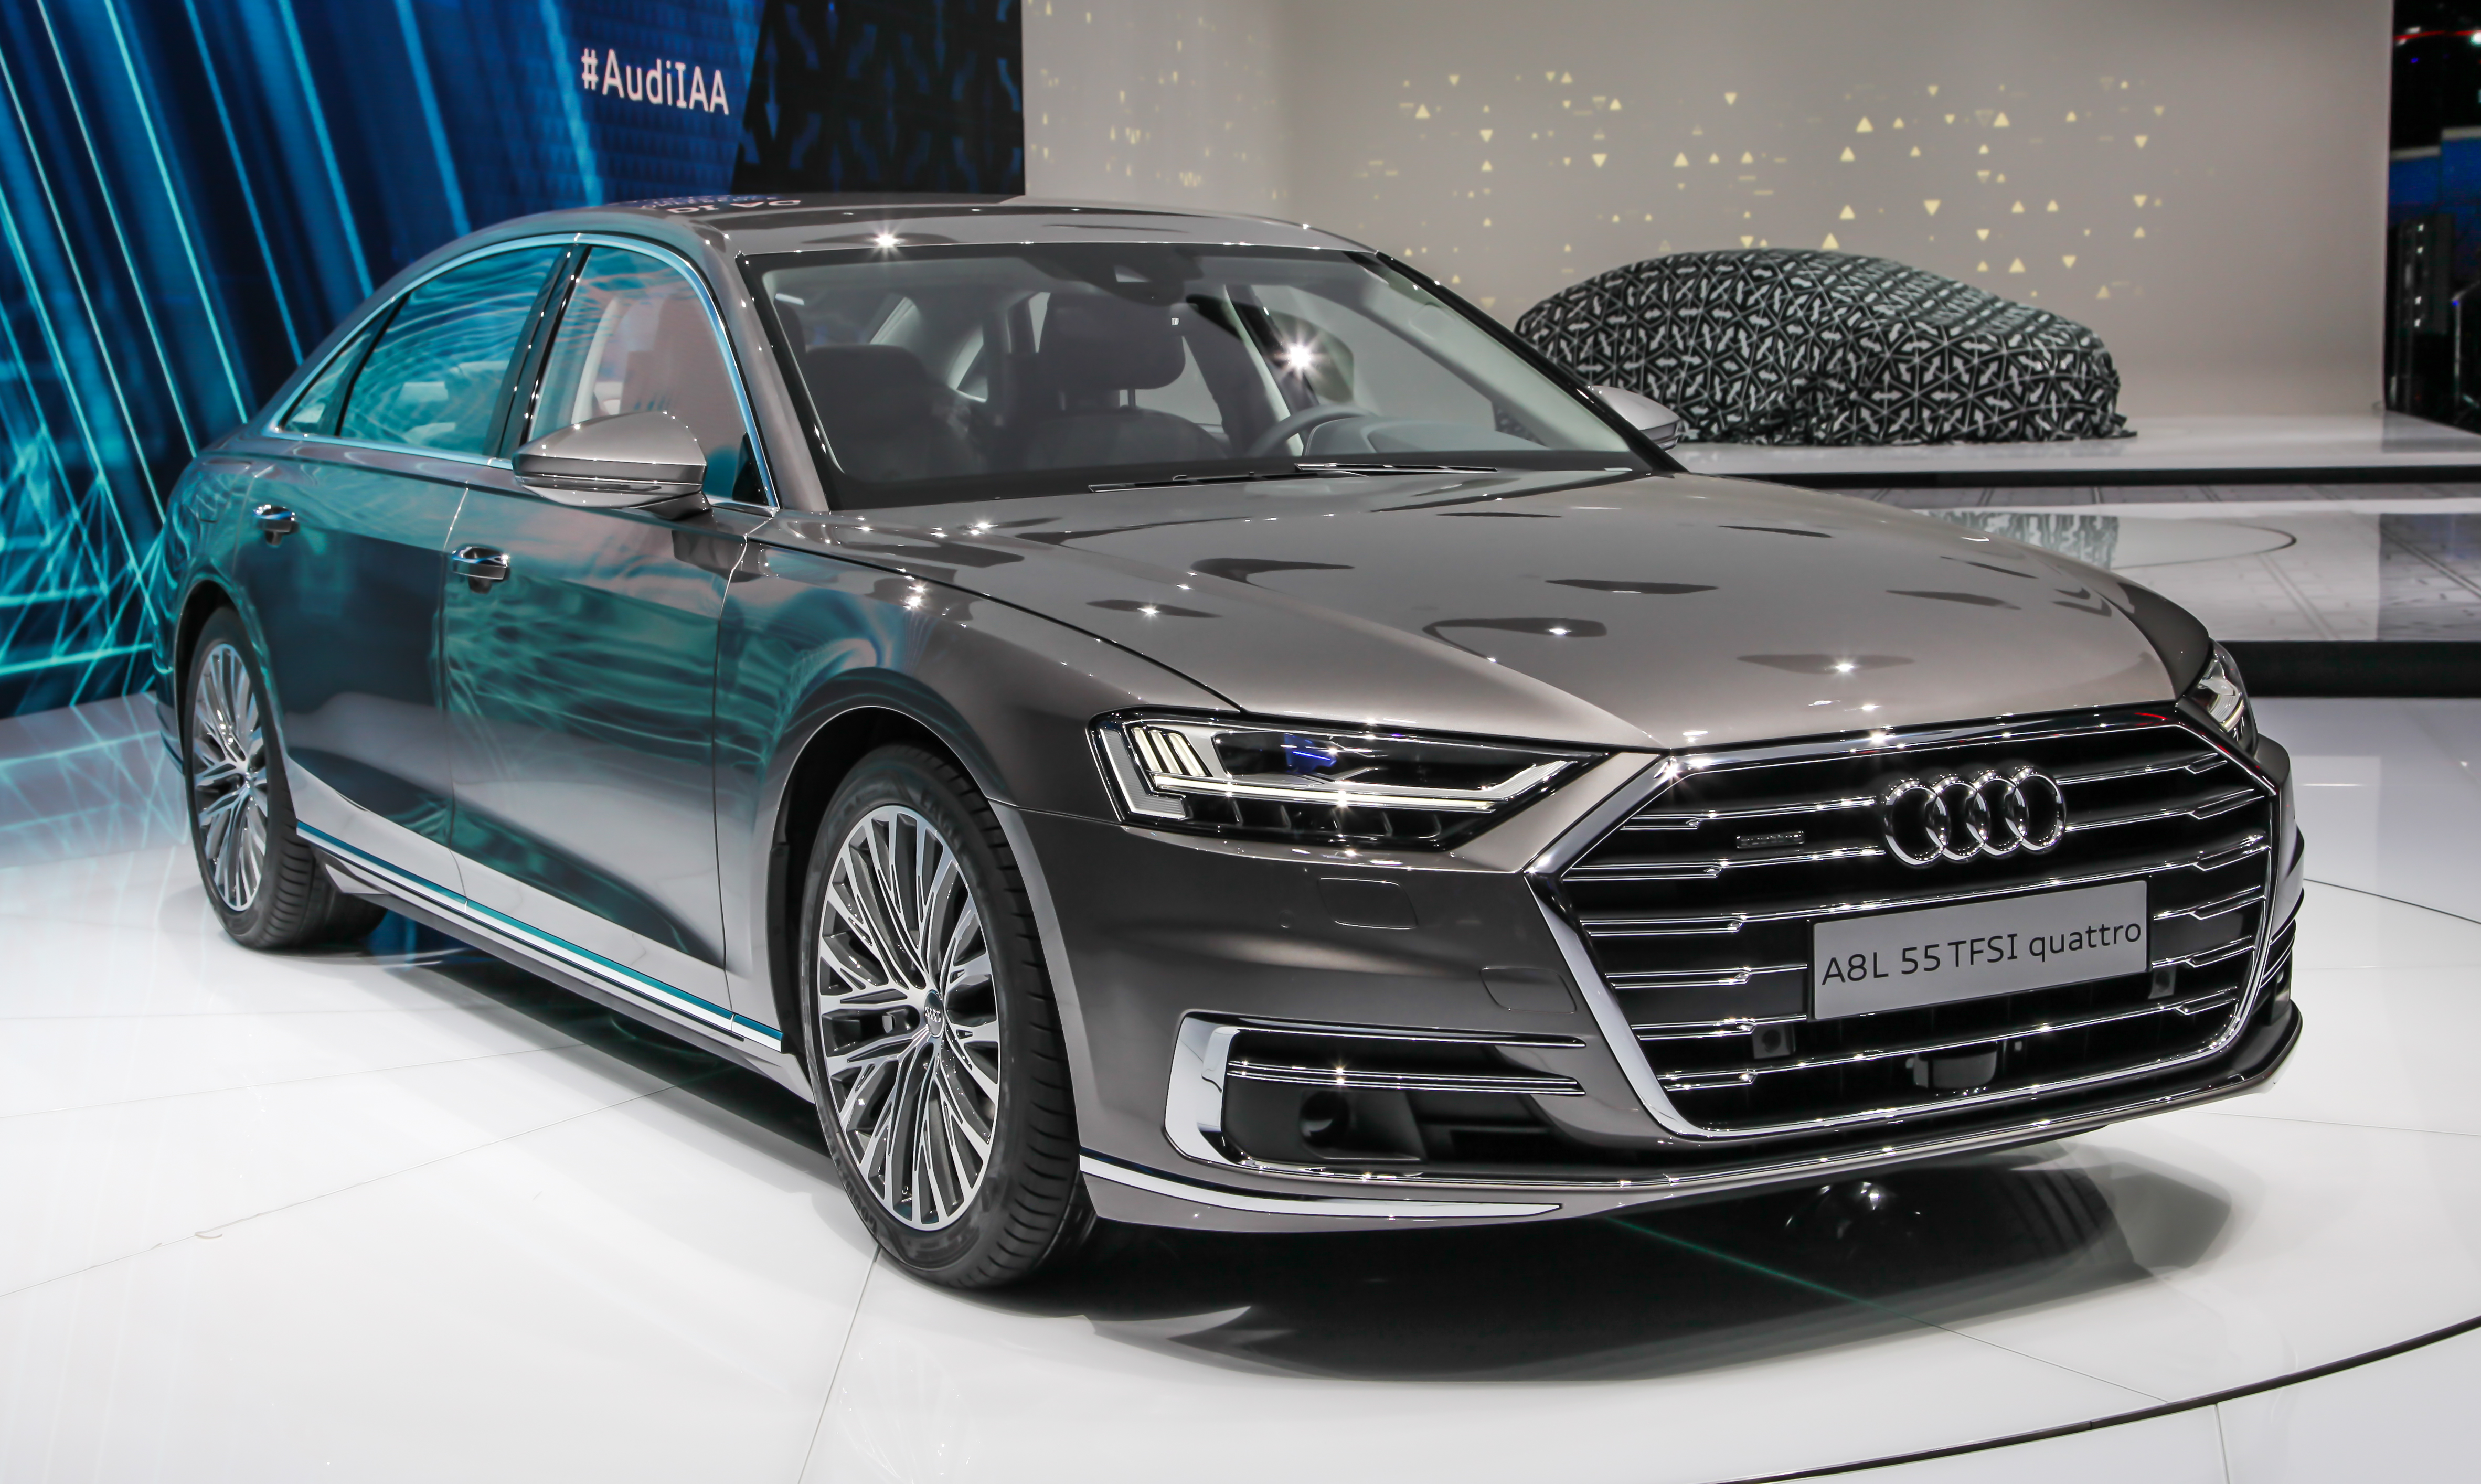 Audi A8 exterior specifications